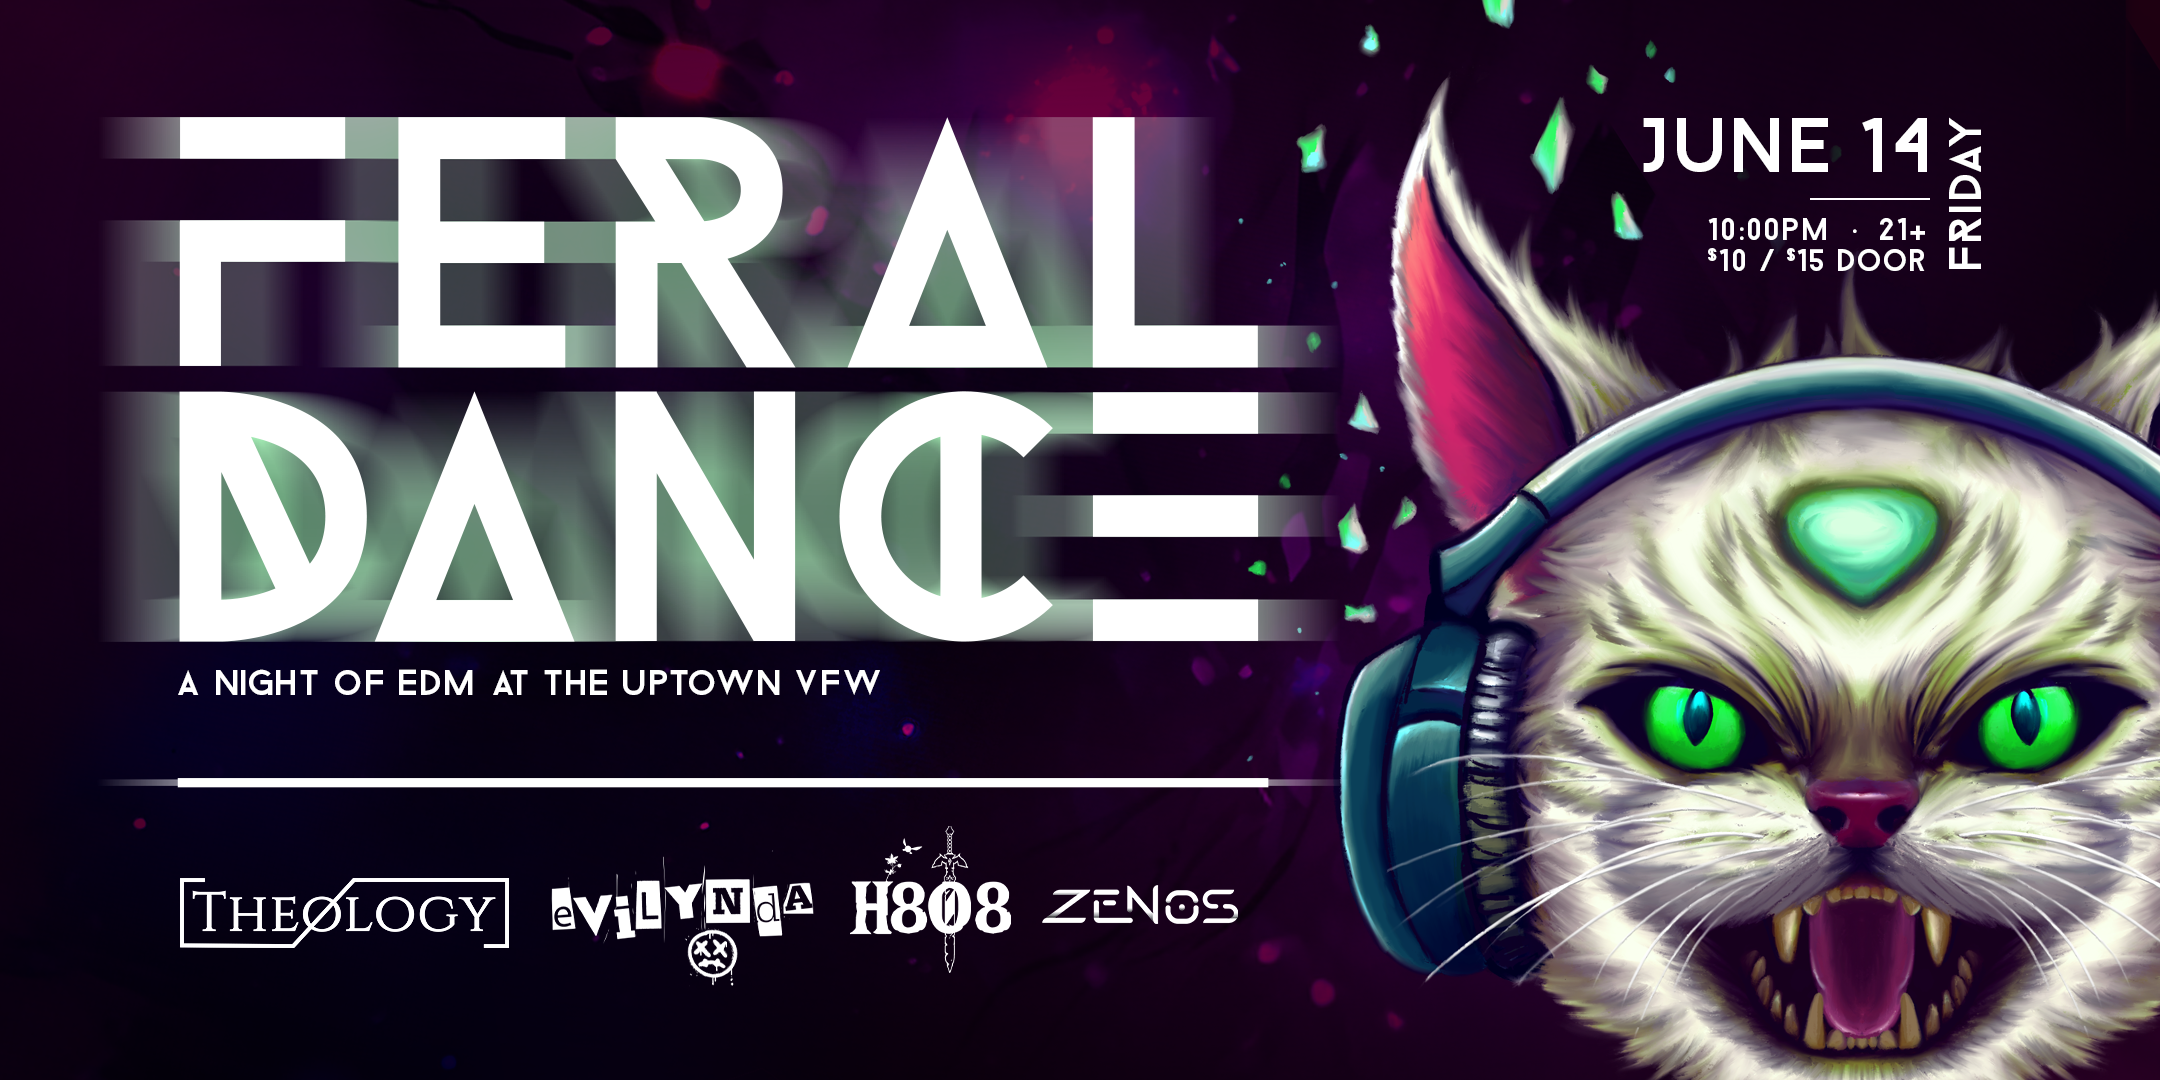 Feral Dance A Night of EDM + Live GoGo Dancing Friday, June 14 James Ballentine "Uptown" VFW Post 246 Doors 10:00pm :: Music 10:00pm :: 21+ $10 ADV / $15 DOS TICKETS ON SALE NOW